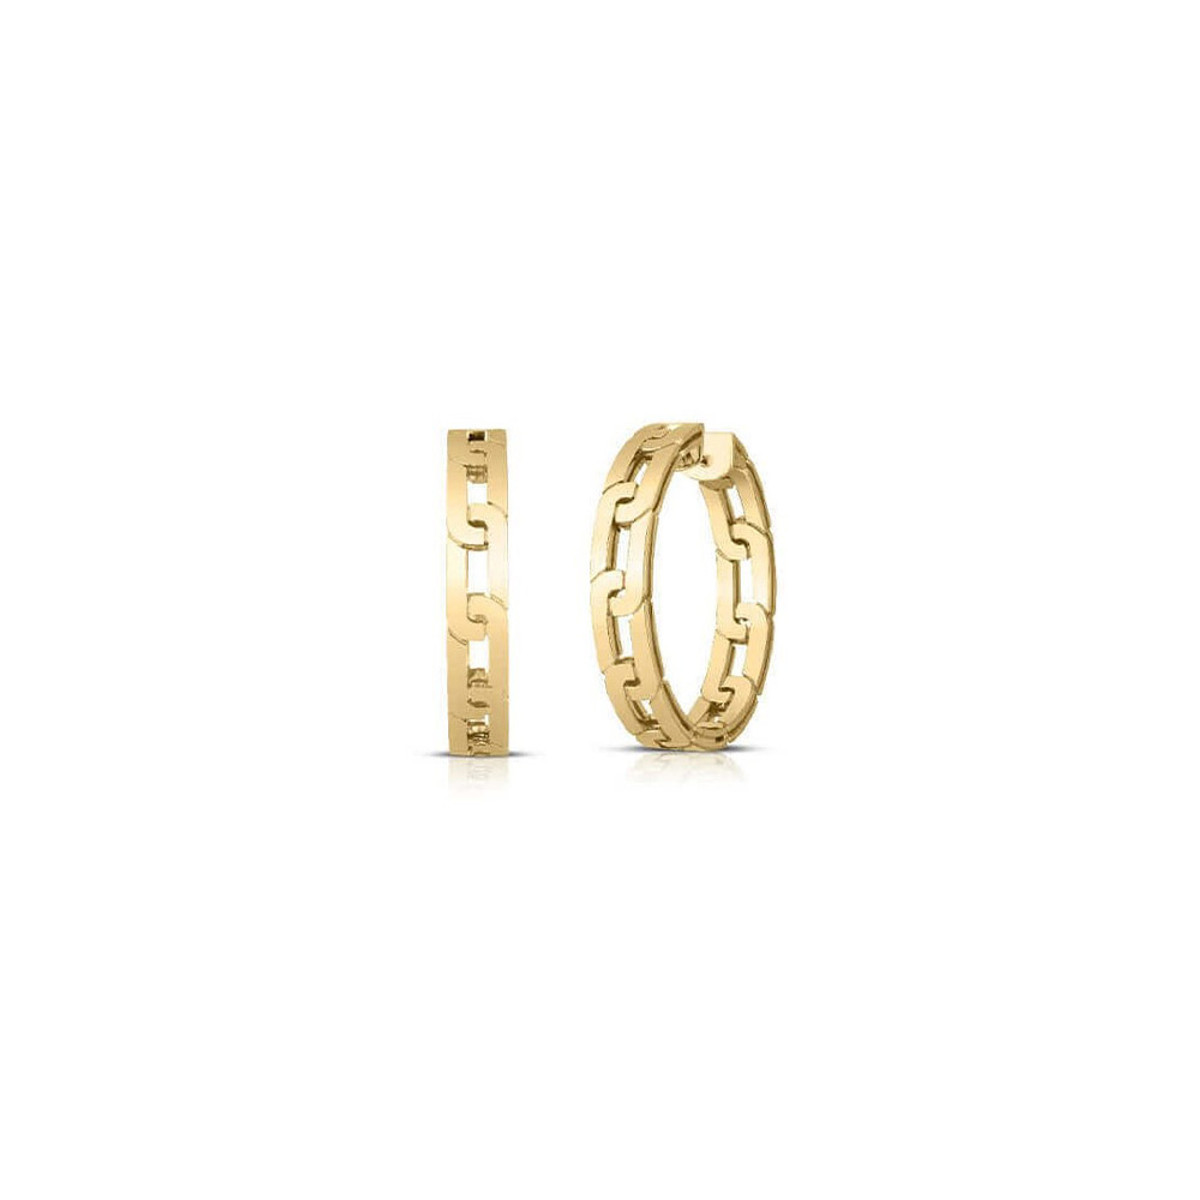 Roberto Coin 18K Yellow Gold Navarra Earrings-57374 Product Image